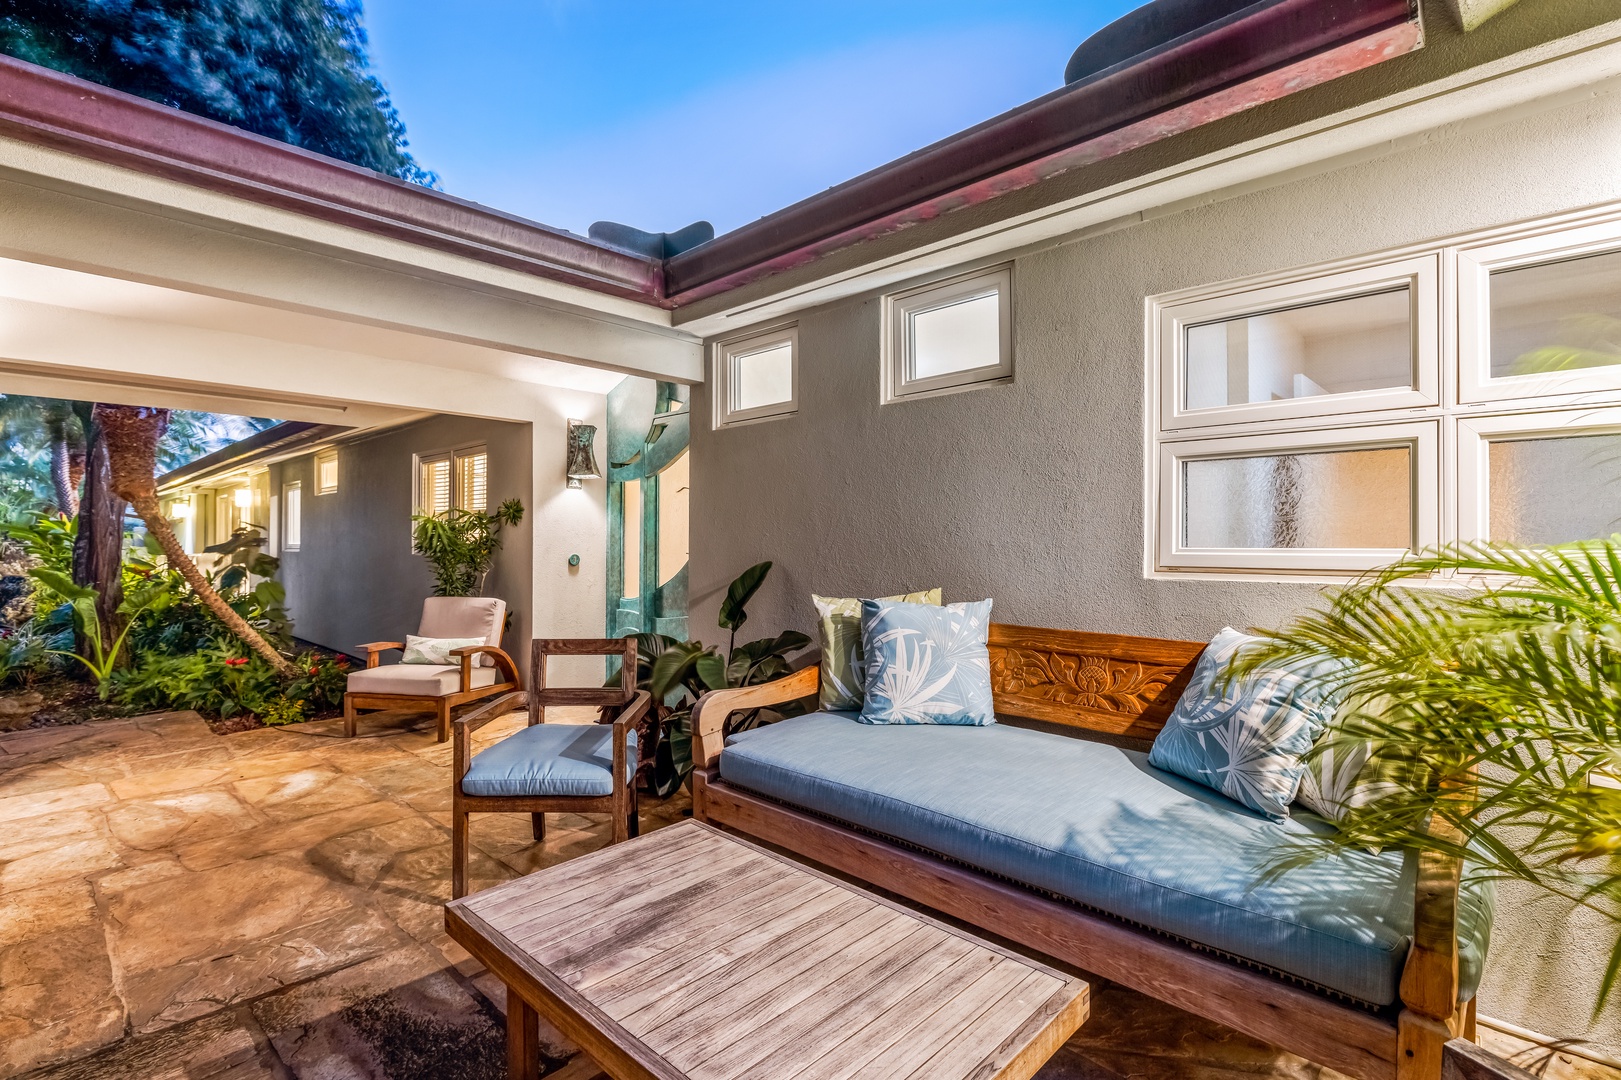 Honolulu Vacation Rentals, Hale Ola - Grab a glass of wine and sit to admire the sunset on the front porch